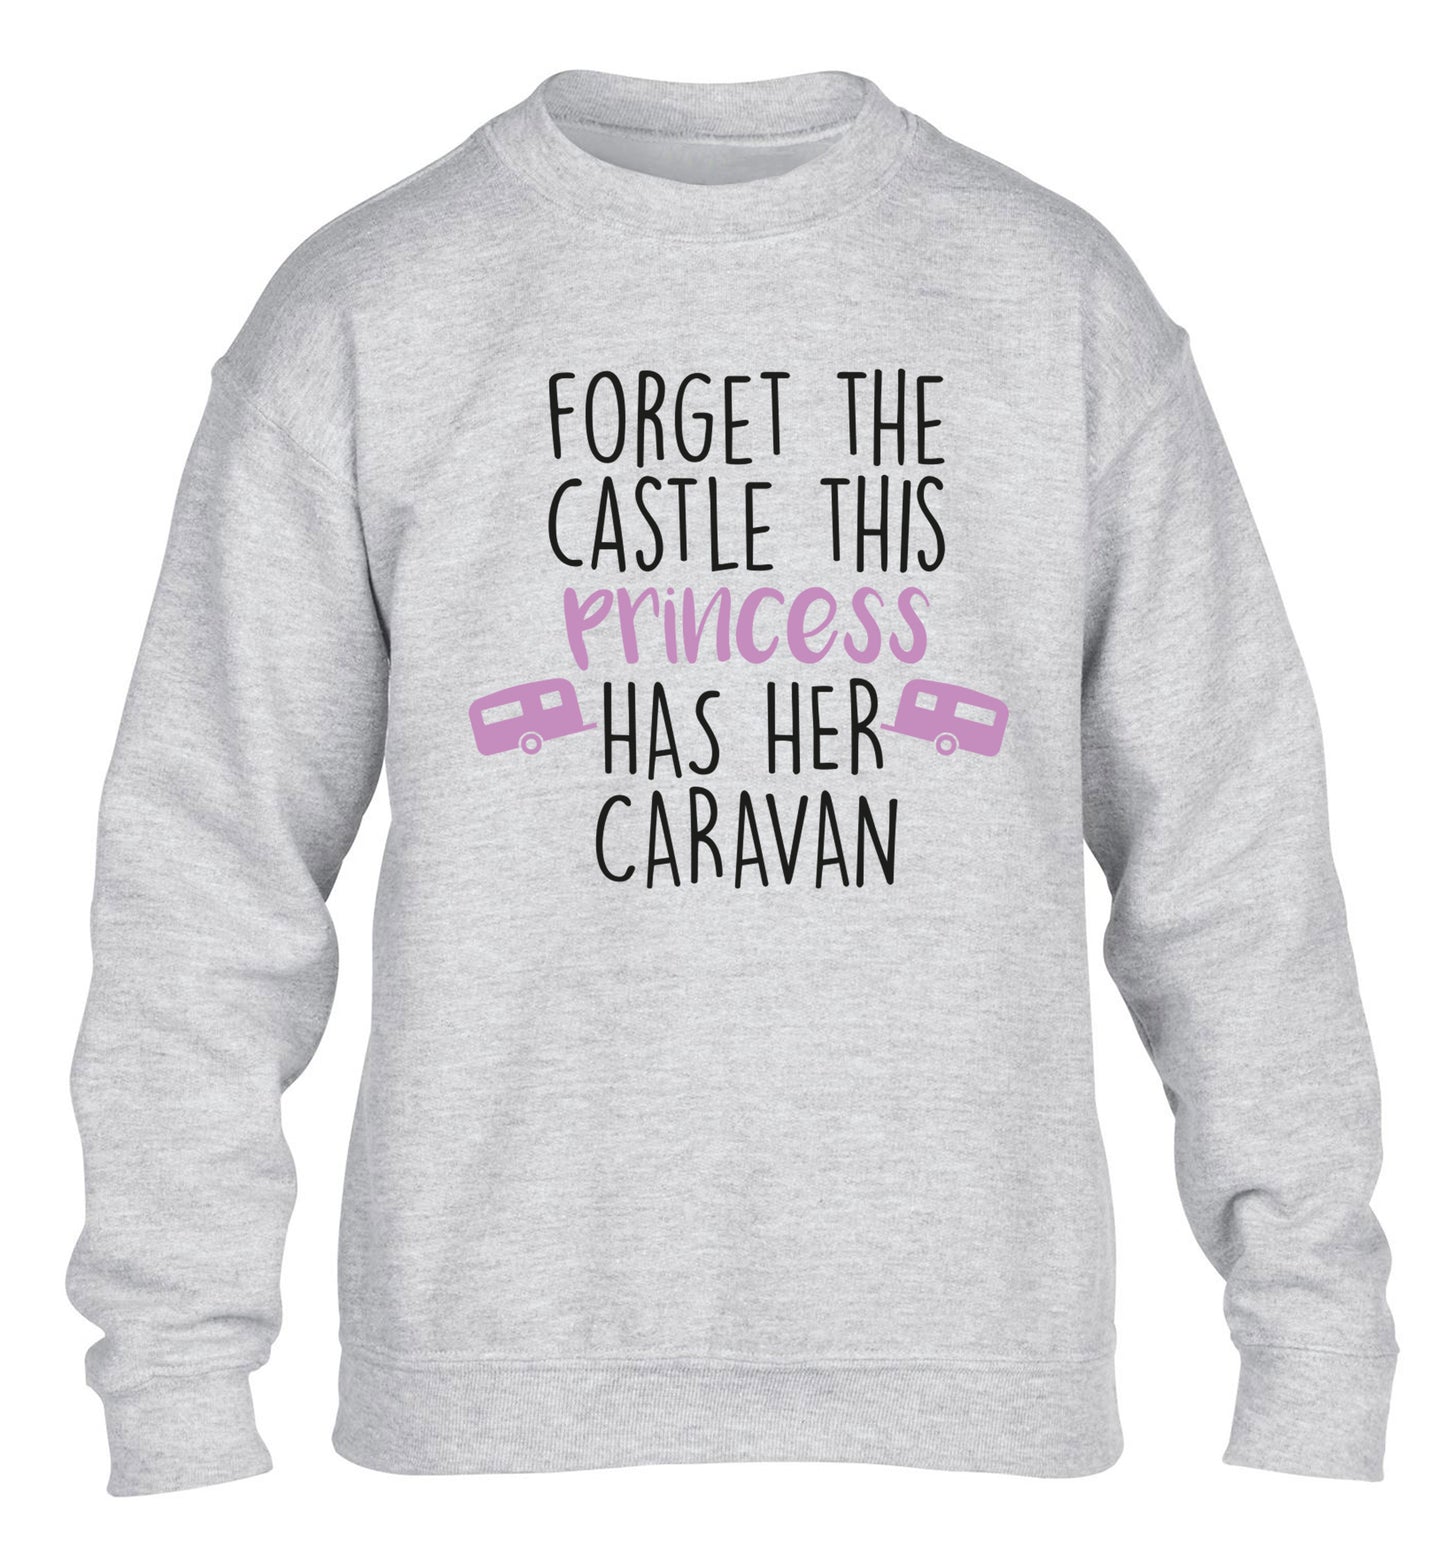 Forget the castle this princess lives at the caravan children's grey sweater 12-14 Years